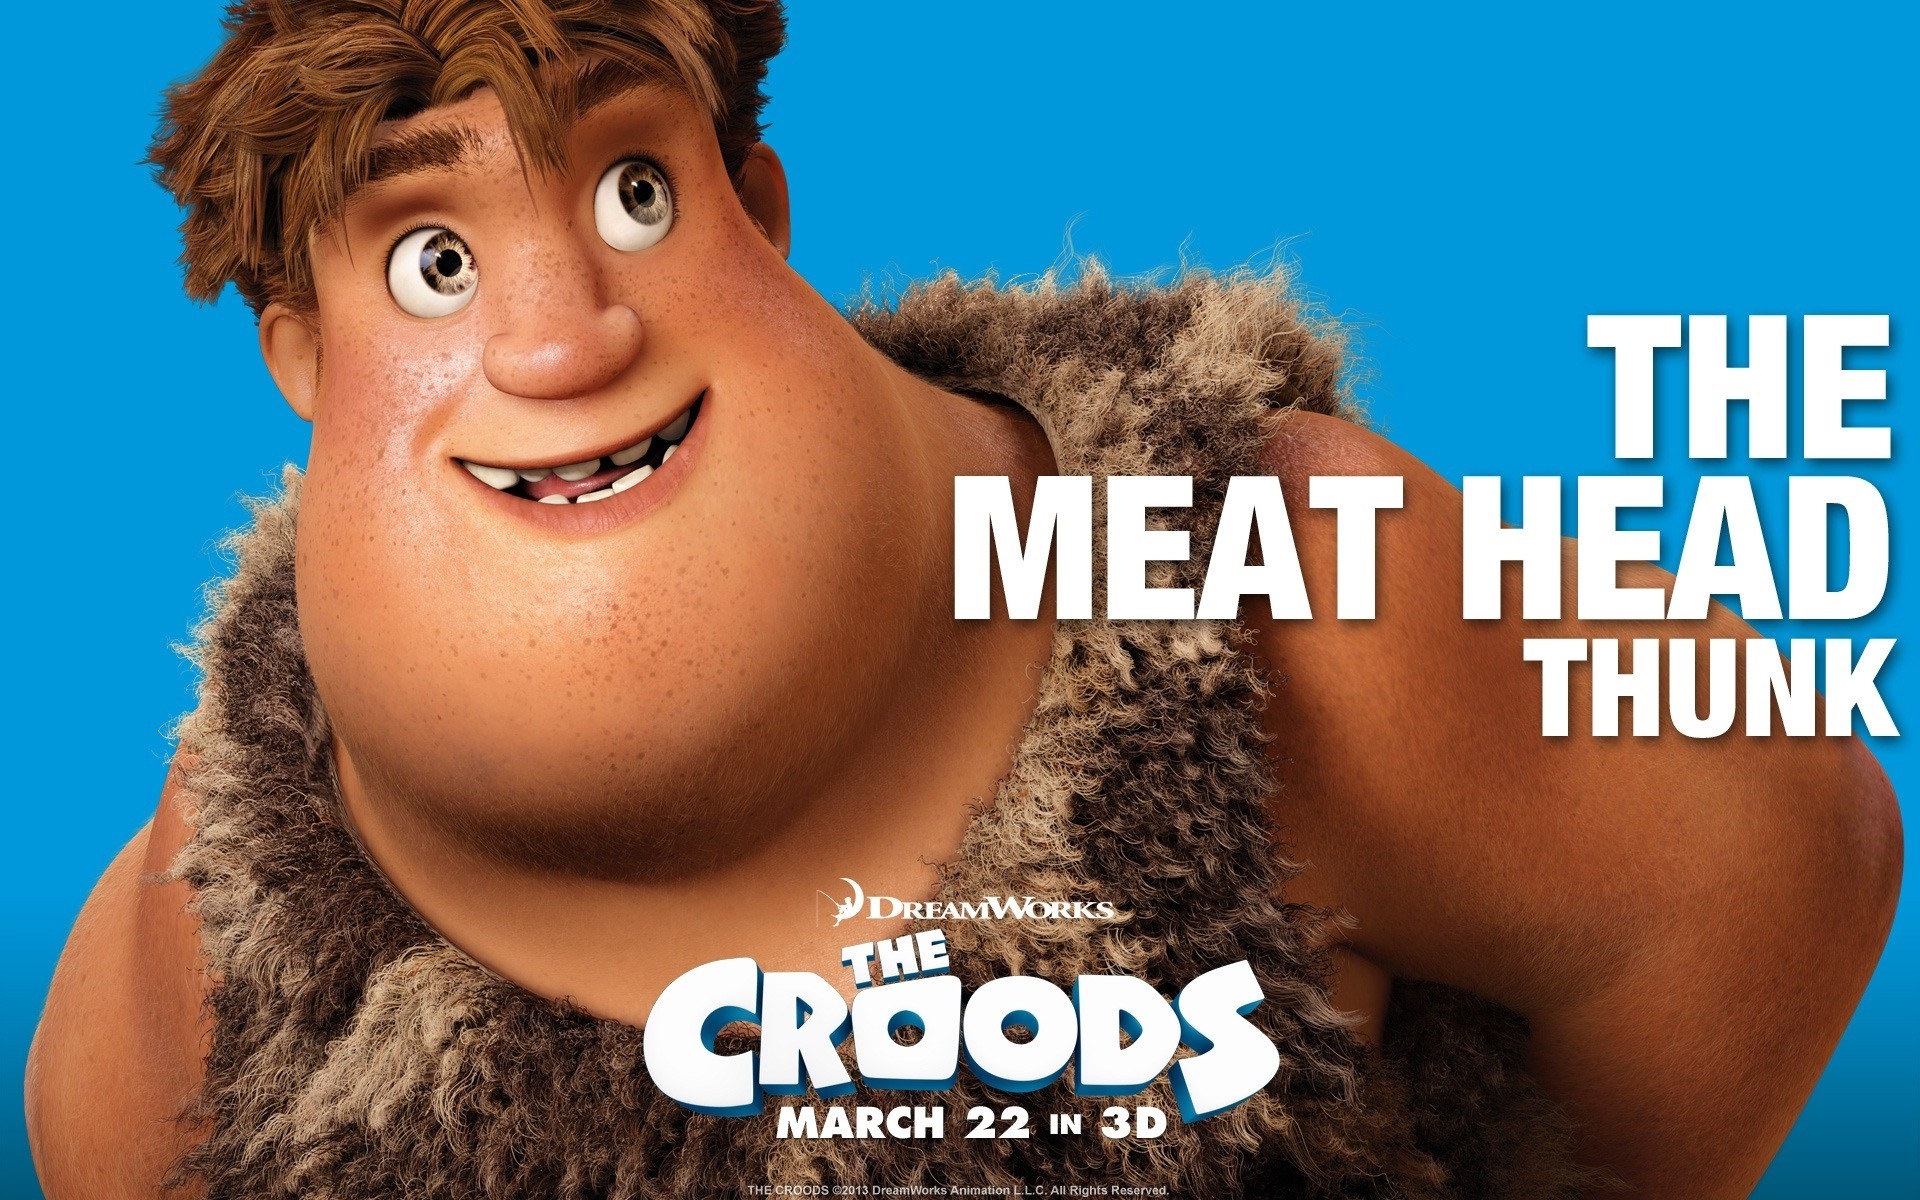 V Croods HD Movie Wallpapers #13 - 1920x1200